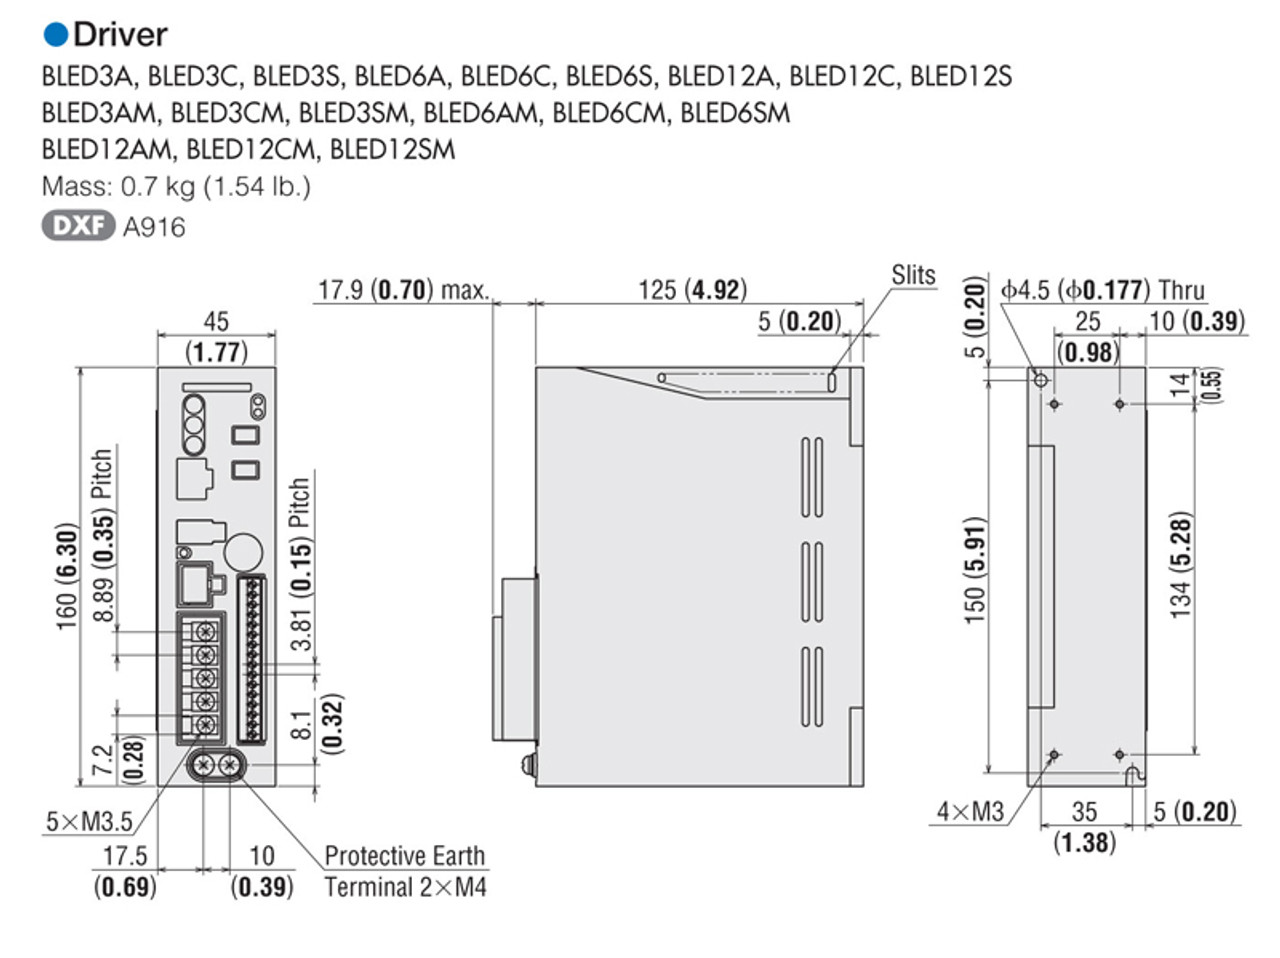 BLE46AMA - <head>        <title>BLE46AMA, Brushless DC Motor Speed Control System</title><meta name="description" content="The BLE Series sets a new standard for brushless DC motors (BLDC motors) with up to 4,000 r/min in an energy saving, compact package." /><meta name="keywords" content="bldc motors, brushless dc motors, dc gear motor, dc motor, brushless motor, dc speed control motor" /> <link rel="canonical" href="https://catalog.orientalmotor.com/item/shop-ble-series-flex-brushless-dc-motors/ble-series-brushless-dc-speed-controllers/ble46ama" /> <!-- Start of HubSpot Embed Code -->  <script type="text/javascript" id="hs-script-loader" async defer src="//js.hs-scripts.com/2284573.js"></script><!-- End of HubSpot Embed Code --><!--Icons--><link rel="stylesheet" href="/ImgCustom/1081/OM-catnav-style-mob.css"><link rel="apple-touch-icon" sizes="57x57" href="/ImgCustom/1081/apple-icon-57x57.png"><link rel="apple-touch-icon" sizes="60x60" href="/ImgCustom/1081/apple-icon-60x60.png"><link rel="apple-touch-icon" sizes="72x72" href="/ImgCustom/1081/apple-icon-72x72.png"><link rel="apple-touch-icon" sizes="76x76" href="/ImgCustom/1081/apple-icon-76x76.png"><link rel="apple-touch-icon" sizes="114x114" href="/ImgCustom/1081/apple-icon-114x114.png"><link rel="apple-touch-icon" sizes="120x120" href="/ImgCustom/1081/apple-icon-120x120.png"><link rel="apple-touch-icon" sizes="144x144" href="/ImgCustom/1081/apple-icon-144x144.png"><link rel="apple-touch-icon" sizes="152x152" href="/ImgCustom/1081/apple-icon-152x152.png"><link rel="apple-touch-icon" sizes="180x180" href="/ImgCustom/1081/apple-icon-180x180.png"><link rel="icon" type="image/png" sizes="192x192"  href="/ImgCustom/1081/android-icon-192x192.png"><link rel="icon" type="image/png" sizes="32x32" href="/ImgCustom/1081/favicon-32x32.png"><link rel="icon" type="image/png" sizes="96x96" href="/ImgCustom/1081/favicon-96x96.png"><link rel="icon" type="image/png" sizes="16x16" href="/ImgCustom/1081/favicon-16x16.png"><link rel="manifest" href="/ImgCustom/1081/manifest.json"><meta name="msapplication-TileColor" content="#ffffff"><meta name="msapplication-TileImage" content="/ImgCustom/1081/ms-icon-144x144.png"><meta name="theme-color" content="#ffffff"><link rel="stylesheet" href="/ImgCustom/1081/traceparts-embeddedcad-mobile.css"><meta property="og:title" content="BLE46AMA, Brushless DC Motor Speed Control System"/><meta property="og:type" content="article"/><meta property="og:url" content="https://catalog.orientalmotor.com/item/shop-ble-series-flex-brushless-dc-motors/ble-series-brushless-dc-speed-controllers/ble46ama"/><meta property="og:image" content="https://catalog.orientalmotor.com/ImgMedium/blem46m2-round-package.jpg"/><meta property="og:description" content="The BLE Series sets a new standard for brushless DC motors (BLDC motors) with up to 4,000 r/min in an energy saving, compact package."/><meta property="og:locale" content="en_US"/><meta property="og:site_name" content="Oriental Motor USA"/>        <!--IsPlpHTTPS : True-->        <!--wn1sdwk0003LF New Code--><meta http-equiv='expires' content='-1'><meta http-equiv='Pragma' content='no-cache'><meta charset='utf-8'>                <script type="text/javascript">        (function () {            if (!window.JSON) {                var plp_json = document.createElement('script'); plp_json.type = 'text/javascript';                plp_json.src = '~/Scripts/json2.js?v=13.1.82.1';                var s = document.getElementsByTagName('script')[0]; s.parentNode.insertBefore(plp_json, s);            }            })();        </script>                <script type="text/javascript" src="/plp/cbplpBundles.axd/CBPLPJs/13.1.82.1/"></script>                <script src="/plp/Scripts/angular.min.js?v=13.1.82.1"></script>        <script src="/plp/Scripts/app.min.js?v=13.1.82.1"></script>        <script type="text/javascript" src="/plp/cbplpBundles.axd/CBPLPNonCADJs/13.1.82.1/"></script>            <script src="/plp/Scripts/cadprogressbar.js?v=13.1.82.1"></script>            <script src="/plp/Scripts/script.min.js?v=13.1.82.1"></script>            <script src="/plp/Scripts/userdata.min.js?v=13.1.82.1"></script>            <script>              var plpwcworkerjs = "/plp/Scripts/auditWorker.js?v=13.1.82.1";            </script>                <meta name="viewport" content="width=device-width, initial-scale=1">        <meta id="noimageavailable" data-noimage="/ImgCustom/1081/placeholder_notavailable.gif" /><link href="/ImgCustom/1081/Themes/PrimaryTheme/PrimaryTheme.css?v=13.1.82.1" rel="stylesheet" type="text/css" />                <link href="/ImgCustom/1081/OM-catnav-style.css?v=13.1.82.1" rel="stylesheet" type="text/css" /><link href="/ImgCustom/1081/OMmain.css?v=13.1.82.1" rel="stylesheet" type="text/css" /><link href="/ImgCustom/1081/overwrite.css?v=13.1.82.1" rel="stylesheet" type="text/css" /><link href="/ImgCustom/1081/p7MBX-01.css?v=13.1.82.1" rel="stylesheet" type="text/css" /><link href="/ImgCustom/1081/traceparts-embeddedcad-desktop.css?v=13.1.82.1" rel="stylesheet" type="text/css" />        <link rel="stylesheet" type="text/css" href="/plp/cbplpBundles.axd/CBPLPNonCADCss/13.1.82.1/"/>                <link rel="stylesheet" type="text/css" href="/plp/cbplpBundles.axd/CBPLPCss/13.1.82.1/"/>        <link href="/plp/css/stylesheet.min.css?v=13.1.82.1" rel="stylesheet" />                <script src="/ImgCustom/1081/chatjs.js?v=13.1.82.1" type="text/javascript"></script><script src="/ImgCustom/1081/conversion-js.js?v=13.1.82.1" type="text/javascript"></script><script src="/ImgCustom/1081/download-links.js?v=13.1.82.1" type="text/javascript"></script><script src="/ImgCustom/1081/Hubspot.js?v=13.1.82.1" type="text/javascript"></script><script src="/ImgCustom/1081/p7EHCscripts.js?v=13.1.82.1" type="text/javascript"></script><script src="/ImgCustom/1081/p7MBXscripts.js?v=13.1.82.1" type="text/javascript"></script><script src="/ImgCustom/1081/p7MGMscripts.js?v=13.1.82.1" type="text/javascript"></script><script src="/ImgCustom/1081/purechat.js?v=13.1.82.1" type="text/javascript"></script><script src="/ImgCustom/1081/search.js?v=13.1.82.1" type="text/javascript"></script><script src="/ImgCustom/1081/traceparts-embeddedcad-desktop.js?v=13.1.82.1" type="text/javascript"></script><script src="/ImgCustom/1081/z_hubspot_1081.js?v=13.1.82.1" type="text/javascript"></script><script src="/ImgCustom/1081/z_hubspot_trackinginfo_1081.js?v=13.1.82.1" type="text/javascript"></script><script src="/ImgCustom/1081/zz_OM2.js?v=13.1.82.1" type="text/javascript"></script>                                    <script type="text/javascript" id="gtm_tracker">        var gaClient = { "Events" :  [{"EventCategory":0,"EventCategoryText":null,"EventTag":0,"EventTagText":null,"EventAnalyticType":0,"EventLabel":null,"NonInteraction":false,"TransactionData":null,"TransactionItem":null,"EventName":null,"IsClientAction":false,"ClientID":null},{"EventCategory":312,"EventCategoryText":"Item Detail","EventTag":333,"EventTagText":"Evaluate","EventAnalyticType":1,"EventLabel":"BLE46AMA","NonInteraction":true,"TransactionData":null,"TransactionItem":null,"EventName":null,"IsClientAction":false,"ClientID":null},{"EventCategory":323,"EventCategoryText":"PDF","EventTag":340,"EventTagText":"Download","EventAnalyticType":1,"EventLabel":"BLE46AMA","NonInteraction":false,"TransactionData":null,"TransactionItem":null,"EventName":null,"IsClientAction":true,"ClientID":"EventName_PDF"},{"EventCategory":324,"EventCategoryText":"Printer-Friendly","EventTag":335,"EventTagText":"InDirect Action","EventAnalyticType":1,"EventLabel":"BLE46AMA","NonInteraction":false,"TransactionData":null,"TransactionItem":null,"EventName":null,"IsClientAction":true,"ClientID":"EventName_Printer_Friendly"},{"EventCategory":325,"EventCategoryText":"Save To Favorites","EventTag":335,"EventTagText":"InDirect Action","EventAnalyticType":1,"EventLabel":"BLE46AMA","NonInteraction":false,"TransactionData":null,"TransactionItem":null,"EventName":null,"IsClientAction":true,"ClientID":"EventName_SaveToFavorites"},{"EventCategory":315,"EventCategoryText":"Image Browser Popup","EventTag":333,"EventTagText":"Evaluate","EventAnalyticType":1,"EventLabel":"BLE46AMA","NonInteraction":false,"TransactionData":null,"TransactionItem":null,"EventName":null,"IsClientAction":true,"ClientID":"PrimaryImage-53793"},{"EventCategory":322,"EventCategoryText":"Attribute Help Popup","EventTag":333,"EventTagText":"Evaluate","EventAnalyticType":1,"EventLabel":"Brushless DC Motor Speed Control System","NonInteraction":false,"TransactionData":null,"TransactionItem":null,"EventName":null,"IsClientAction":true,"ClientID":"Brushless DC Motor Speed Control System"},{"EventCategory":325,"EventCategoryText":"Save To Favorites","EventTag":335,"EventTagText":"InDirect Action","EventAnalyticType":1,"EventLabel":"BLE46AMA","NonInteraction":false,"TransactionData":null,"TransactionItem":null,"EventName":null,"IsClientAction":true,"ClientID":"Brushless DC Motor Speed Control System"},{"EventCategory":311,"EventCategoryText":"Group Detail","EventTag":333,"EventTagText":"Evaluate","EventAnalyticType":1,"EventLabel":"CC01BLEM","NonInteraction":false,"TransactionData":null,"TransactionItem":null,"EventName":null,"IsClientAction":true,"ClientID":"RightSideBar-3747555886"},{"EventCategory":311,"EventCategoryText":"Group Detail","EventTag":333,"EventTagText":"Evaluate","EventAnalyticType":1,"EventLabel":"CC02BLEM","NonInteraction":false,"TransactionData":null,"TransactionItem":null,"EventName":null,"IsClientAction":true,"ClientID":"RightSideBar-3747555887"},{"EventCategory":311,"EventCategoryText":"Group Detail","EventTag":333,"EventTagText":"Evaluate","EventAnalyticType":1,"EventLabel":"OPX-2A","NonInteraction":false,"TransactionData":null,"TransactionItem":null,"EventName":null,"IsClientAction":true,"ClientID":"RightSideBar-3818935542"},{"EventCategory":311,"EventCategoryText":"Group Detail","EventTag":333,"EventTagText":"Evaluate","EventAnalyticType":1,"EventLabel":"CC05IF-USB","NonInteraction":false,"TransactionData":null,"TransactionItem":null,"EventName":null,"IsClientAction":true,"ClientID":"RightSideBar-3818962789"},{"EventCategory":311,"EventCategoryText":"Group Detail","EventTag":333,"EventTagText":"Evaluate","EventAnalyticType":1,"EventLabel":"MCL3010F05","NonInteraction":false,"TransactionData":null,"TransactionItem":null,"EventName":null,"IsClientAction":true,"ClientID":"RightSideBar-384958969"},{"EventCategory":311,"EventCategoryText":"Group Detail","EventTag":333,"EventTagText":"Evaluate","EventAnalyticType":1,"EventLabel":"MCL3010F06","NonInteraction":false,"TransactionData":null,"TransactionItem":null,"EventName":null,"IsClientAction":true,"ClientID":"RightSideBar-384958970"},{"EventCategory":311,"EventCategoryText":"Group Detail","EventTag":333,"EventTagText":"Evaluate","EventAnalyticType":1,"EventLabel":"BLE46AMRA","NonInteraction":false,"TransactionData":null,"TransactionItem":null,"EventName":null,"IsClientAction":true,"ClientID":"RightSideBar-5440567213"}]};               function OnLoadGtm(){            _.each(gaClient.Events, function (e) {                if(e.IsClientAction) return;                switch(e.EventAnalyticType){                    case 1:                        dataLayer = [{ 'event': 'plpDataPushEvent', plpEventCategory: e.EventCategoryText, plpEventAction: e.EventTagText, plpEventLabel: e.EventLabel, plpEventValue: '', plpNonInteraction: e.NonInteraction ? 'true' : 'false' }];                        break;                    case 2:case 3: case 4: case 5: case 6:                        dataLayer.push({ 'event': 'plpRFIFormSubmissionEvent', 'plpEventCategory': e.EventCategoryText, 'plpEventLabel': e.EventLabel});                        break;                    case 7:                                                dataLayer.push( {'event':'plpOrderDataPushEvent', 'transactionId': e.TransactionData.orderNumber, 'transactionAffiliation': e.TransactionData.storeName, 'transactionTotal': e.TransactionData.orderListPrice.replace(/,/g , ''),'transactionTax': e.TransactionData.orderTaxPrice.replace(/,/g , ''),                            'transactionShipping': e.TransactionData.orderShipPrice.replace(/,/g , '')});                        break;                    case 8:                                                dataLayer.push( {'event':'plpOrderDataPushEvent', 'transactionId': e.TransactionItem.orderNumber,                            'transactionProducts':[{'sku': e.TransactionItem.itemNumber,'name': e.TransactionItem.itemName, 'category': e.TransactionItem.categoryName,                                'price': e.TransactionItem.listPrice.replace(/,/g , ''), 'quantity': e.TransactionItem.quantity}]});                        break;                }            });        }        OnLoadGtm();        (function (w, d, s, l, i) {            w[l] = w[l] || [];            w[l].push({ 'gtm.start': new Date().getTime(), event: 'gtm.js' }); var f = d.getElementsByTagName(s)[0], j = d.createElement(s), dl = l != 'dataLayer' ? '&l=' + l : '';            j.async = true;            j.src = 'https://www.googletagmanager.com/gtm.js?id=' + i + dl; f.parentNode.insertBefore(j, f);        })(window, document, 'script', 'dataLayer', 'GTM-KN2SKG4');    </script>    </head>    <body ng-app="plpApp" class='  invisible ' data-dbarea="Pub" data-pagetype="ItemDetail" data-quote="Request Quote">    <noscript>        <iframe src="https://www.googletagmanager.com/ns.html?id=GTM-KN2SKG4" height="0" width="0" style="display:none;visibility:hidden"></iframe>    </noscript>               <div id="imgViewer" title="">                <img src="" />            </div>                    <script>                $(document).ready(function () {                    var catalogCookie = $.cookie('p.cc');                      $.cookie('p.cc', catalogCookie, { path: '/',secure:'true',samesite:'None' });                    var currentCatalog = $.cookie('p.cg');                       $.cookie('p.cg', currentCatalog, { path: '/',secure:'true',samesite:'None' });                    var currentPCAT = '';                    if (catalogCookie == null) {                        $.cookie('p.cc', currentPCAT, { path: '/' });                    }                    else if (currentPCAT != catalogCookie && currentCatalog != null && currentCatalog != 0) {                        NotifySuccess("Catalog Changed");                        $.cookie('p.cc', currentPCAT, { path: '/' });                    }                });            </script> <div class="topBar"><div class="topNav"><div class="topLinksCenter"><a href="https://www.orientalmotor.com/company/index.html">About Oriental Motor